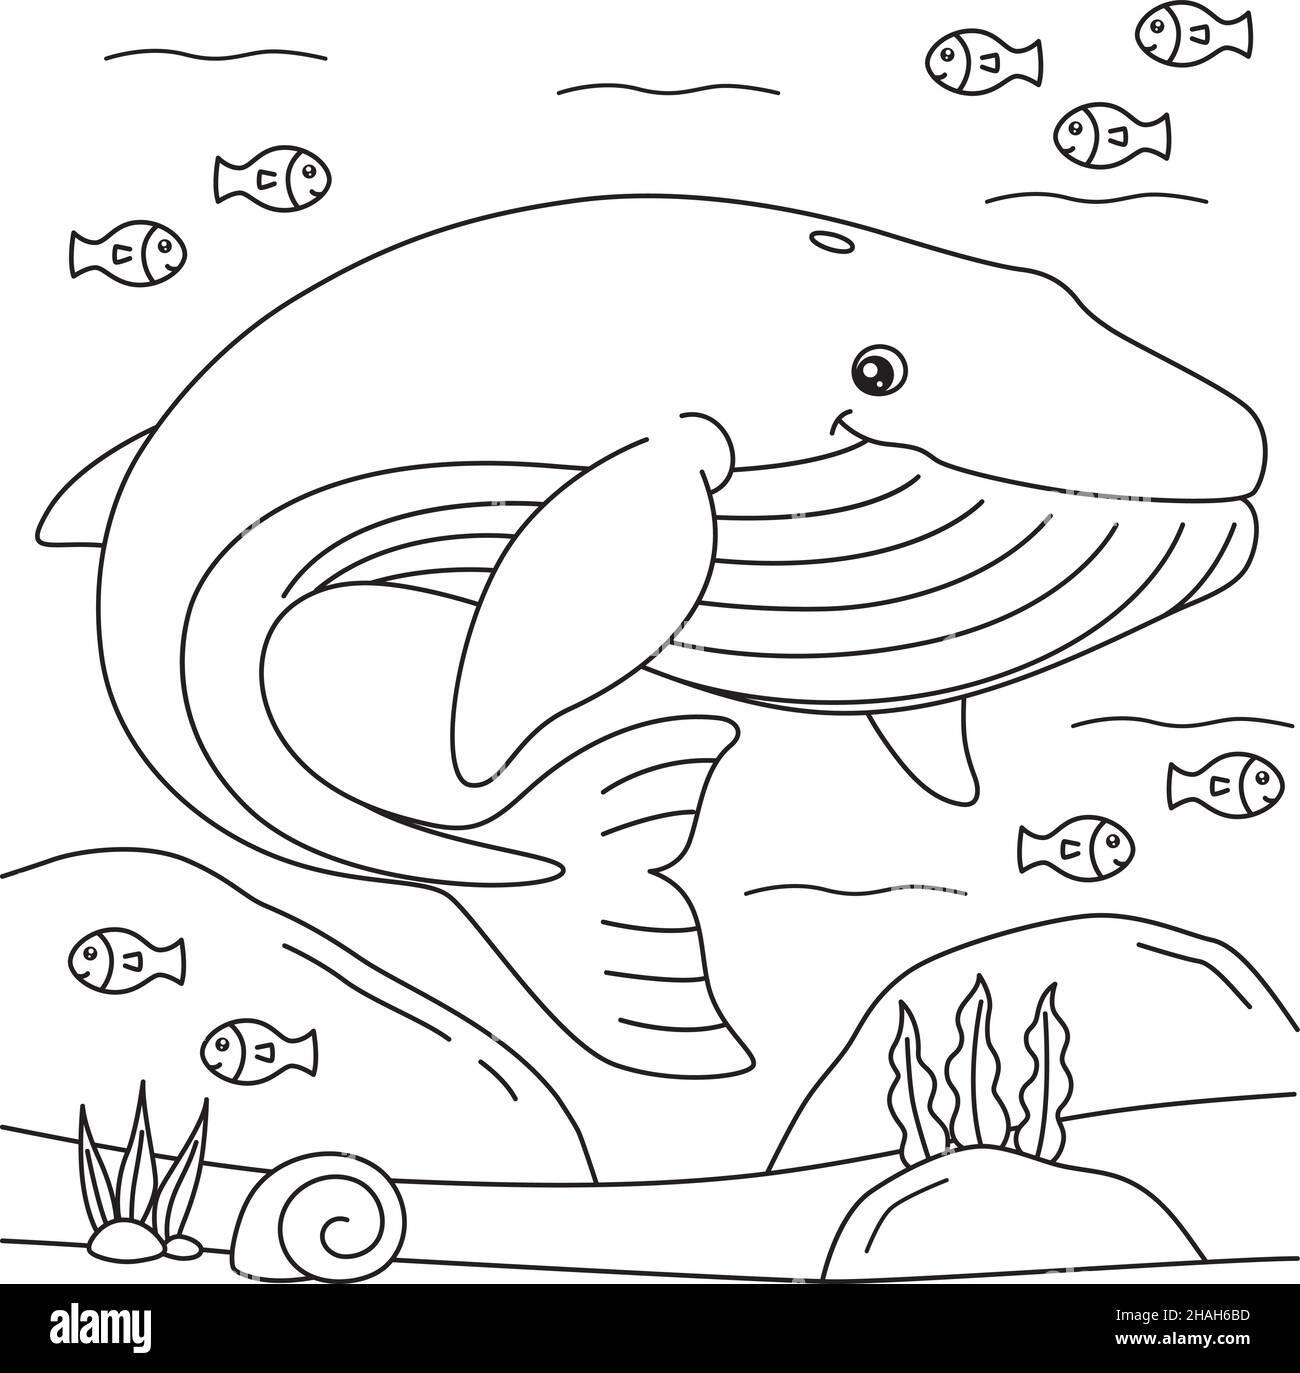 Blue Whale Coloring Page for Kids Stock Vector